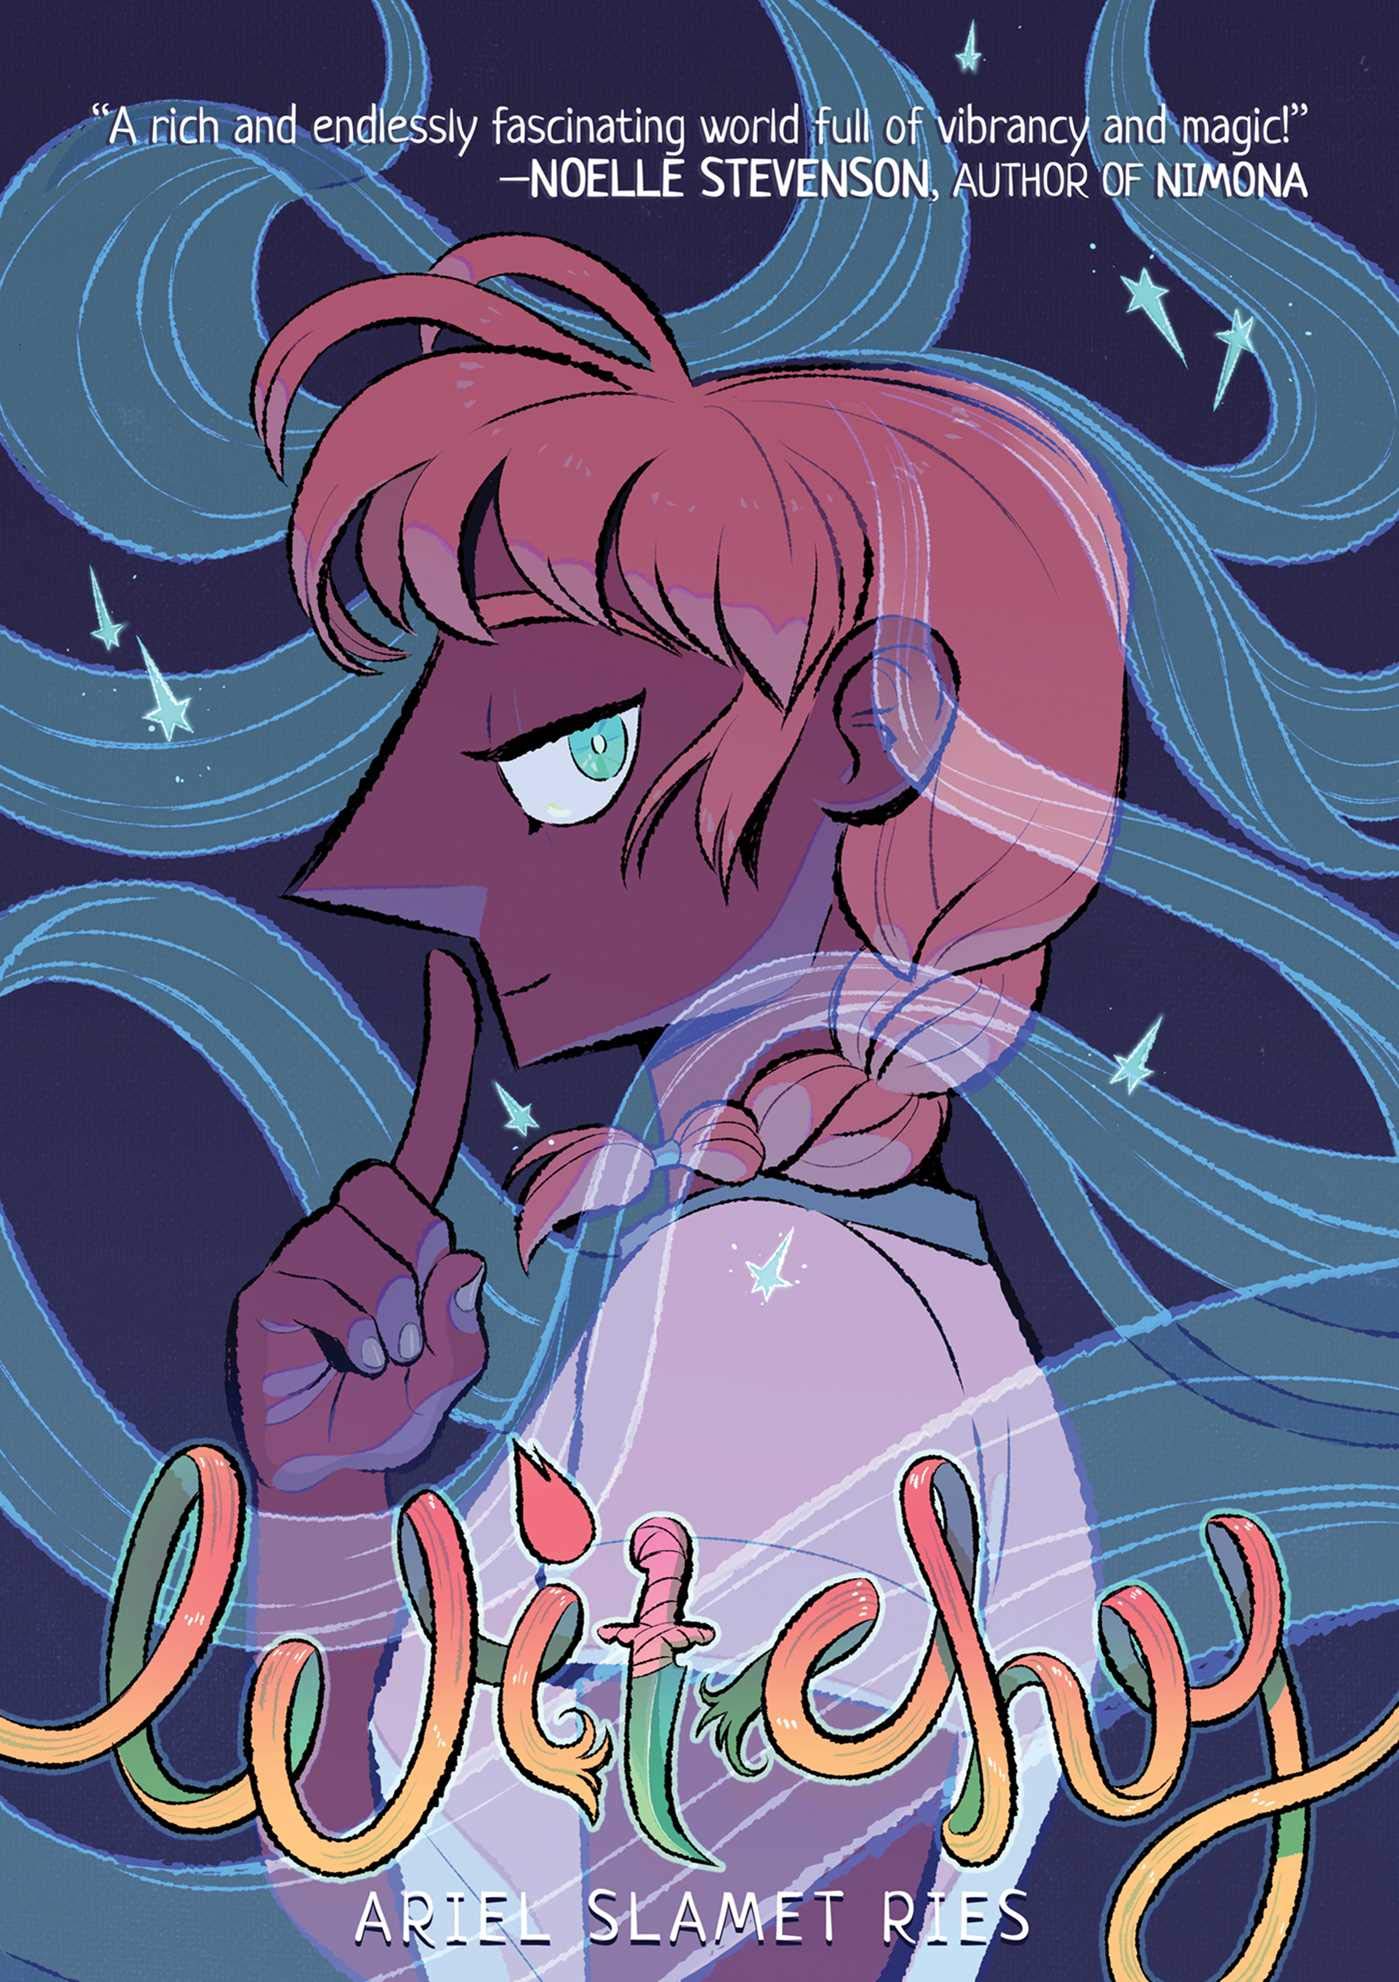 Witchy vol. 1 book cover